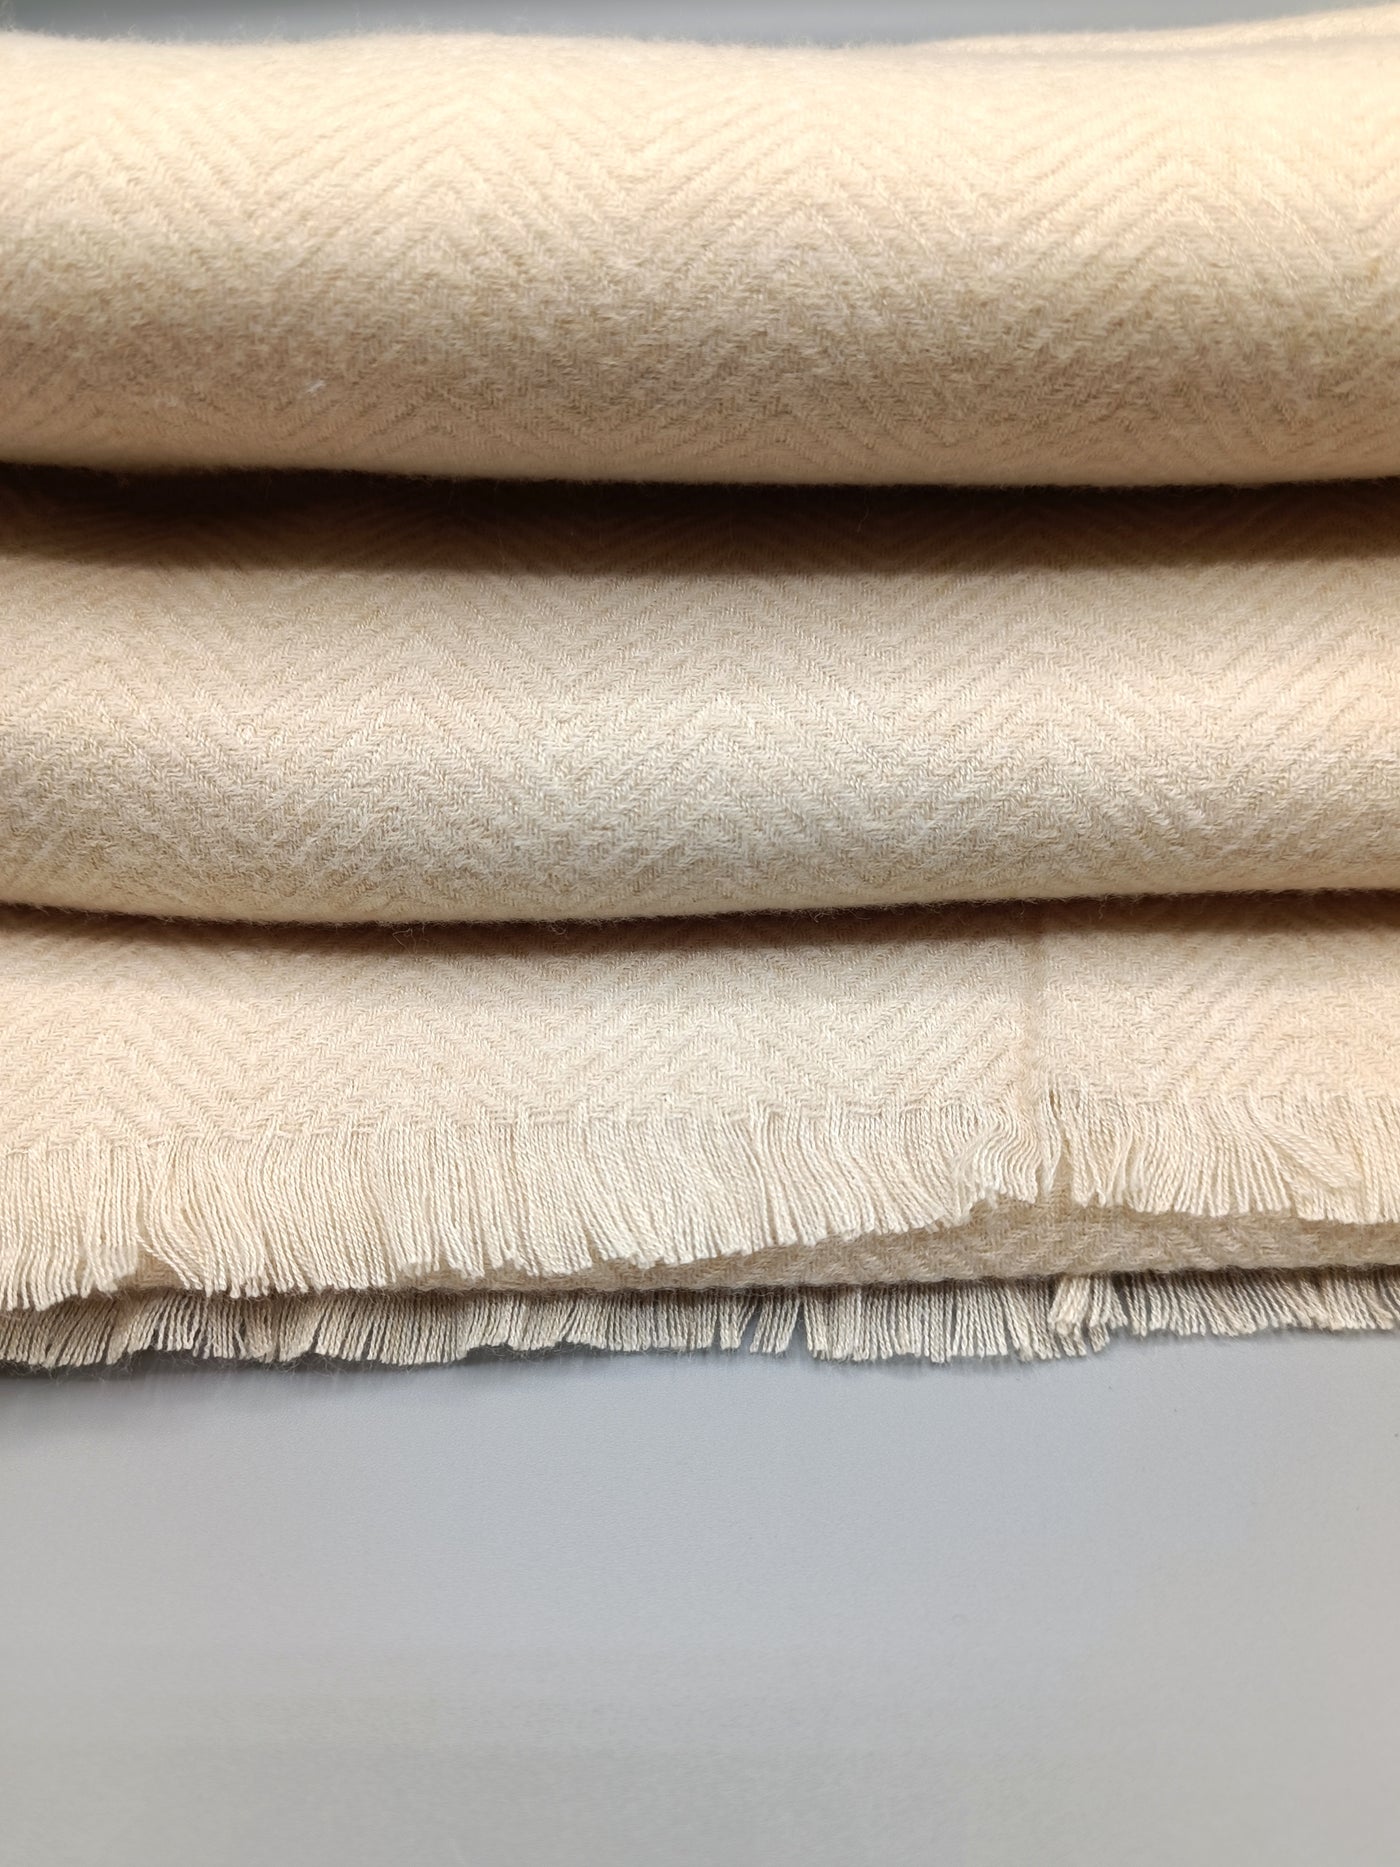 Premium Quality Extremely Soft Light Beige Color Pashmina Cashmere Shawl for Men